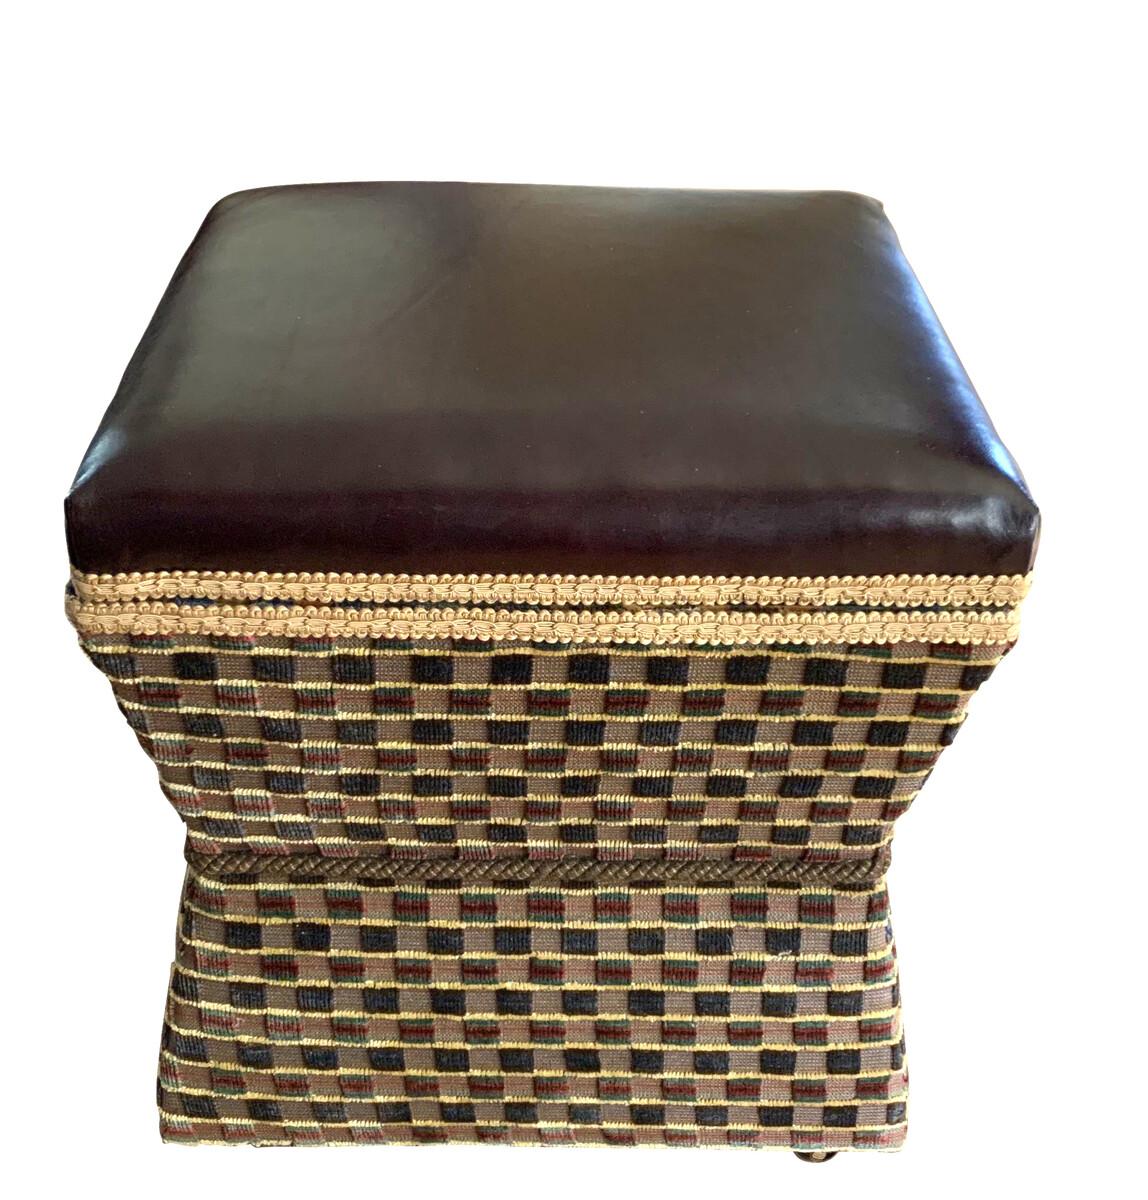 19th century English leather top foot stool.
The leather top is brown, square patterned upholstery on the sides.
The hour glass shaped stool is on casters for easy movement.
The top lifts up for storage, revealing floral print upholstery.
 